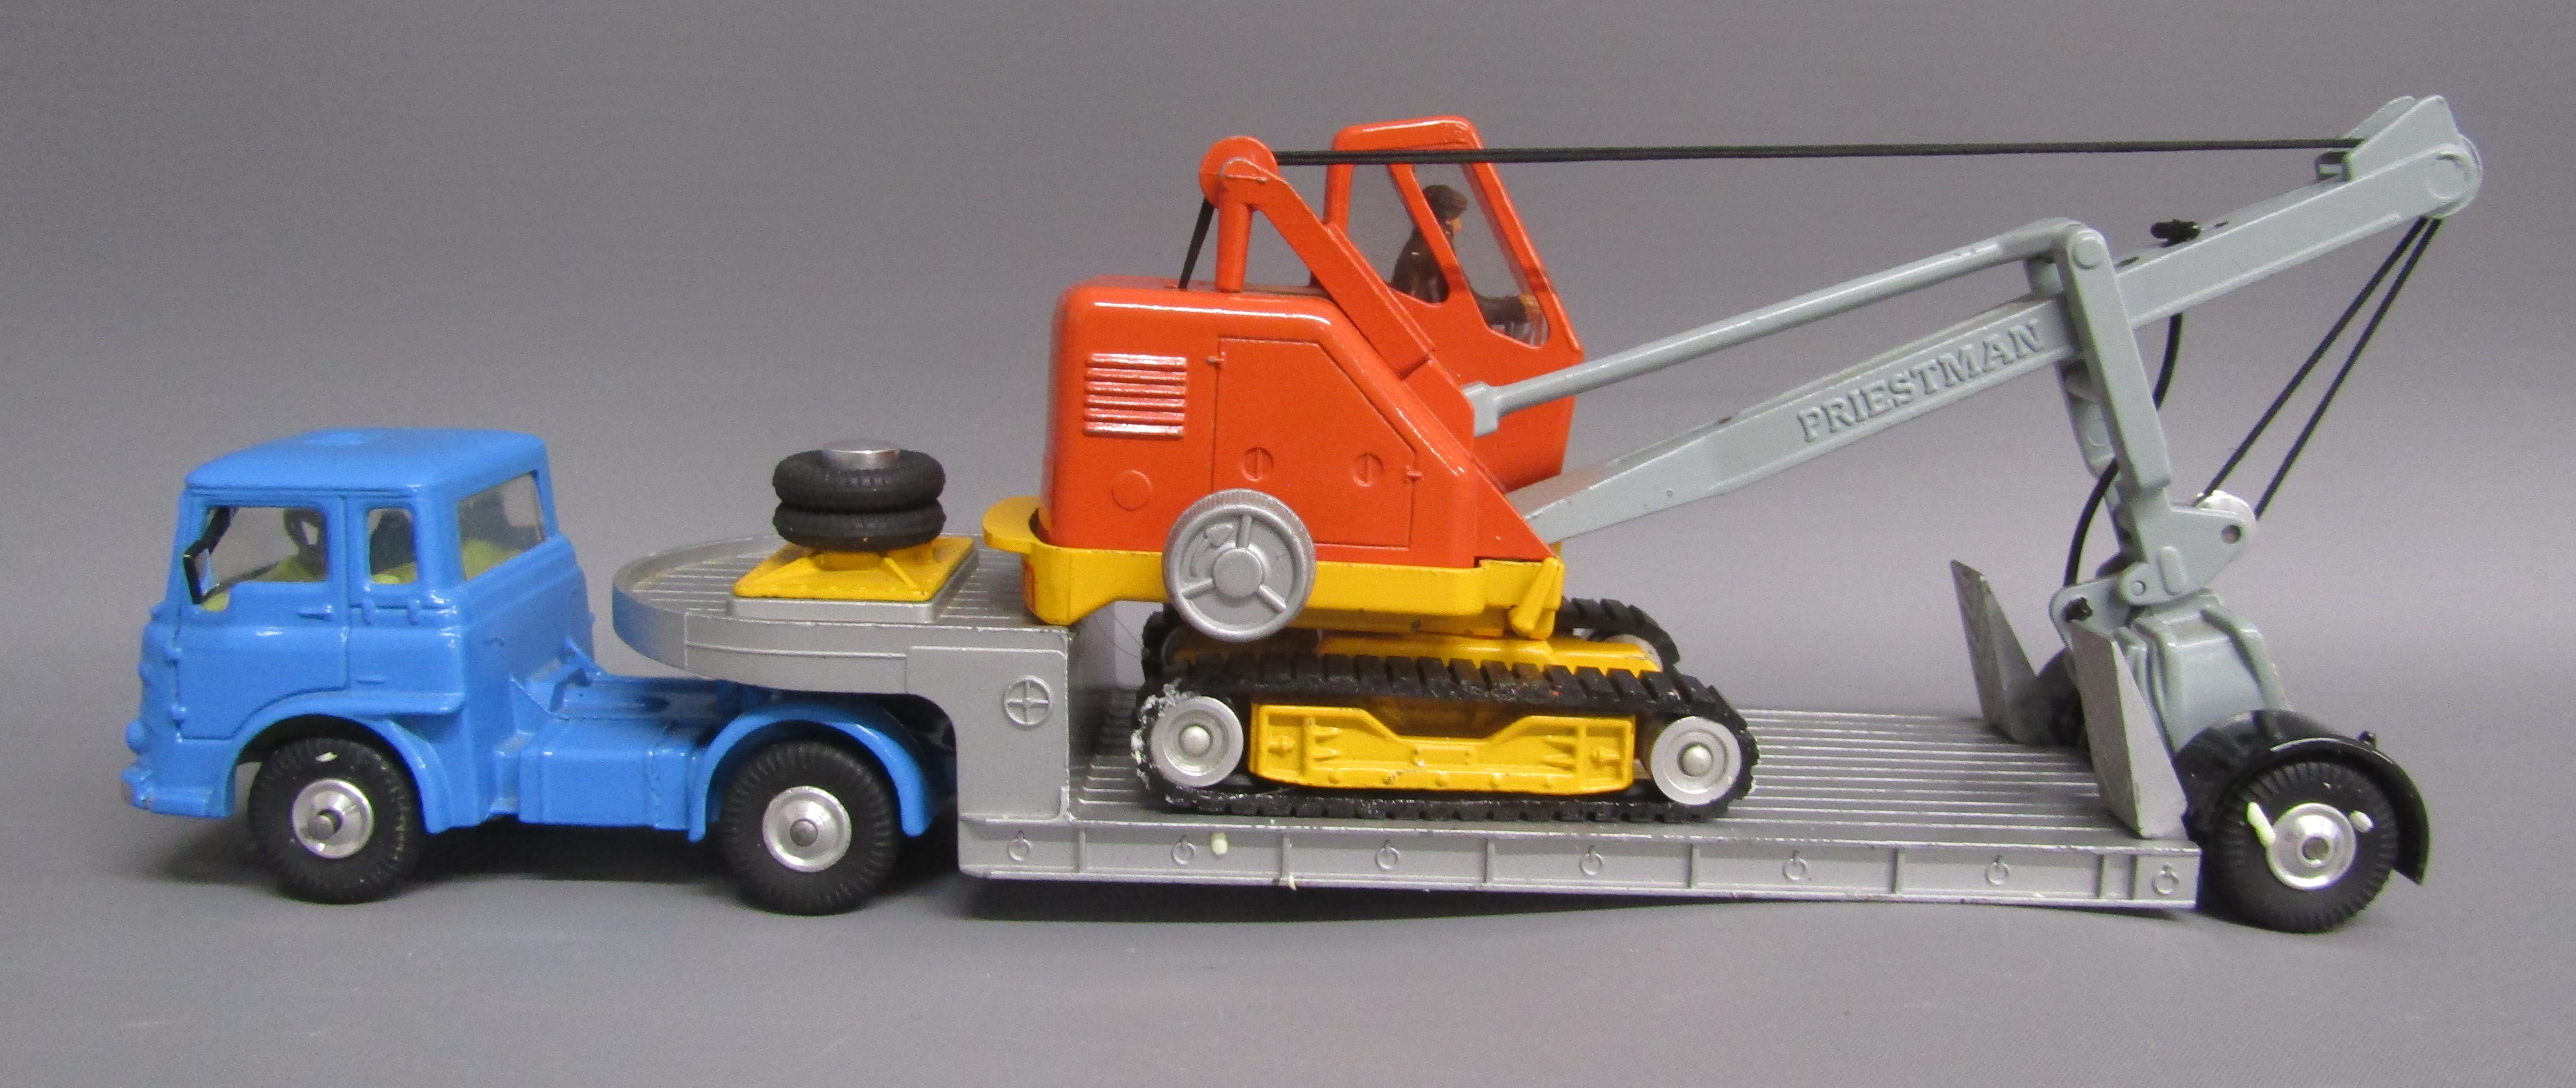 Boxed Corgi Major No 27 Machinery Carrier with Bedford tractor unit and Priestman 'Cub' shovel - Image 3 of 8